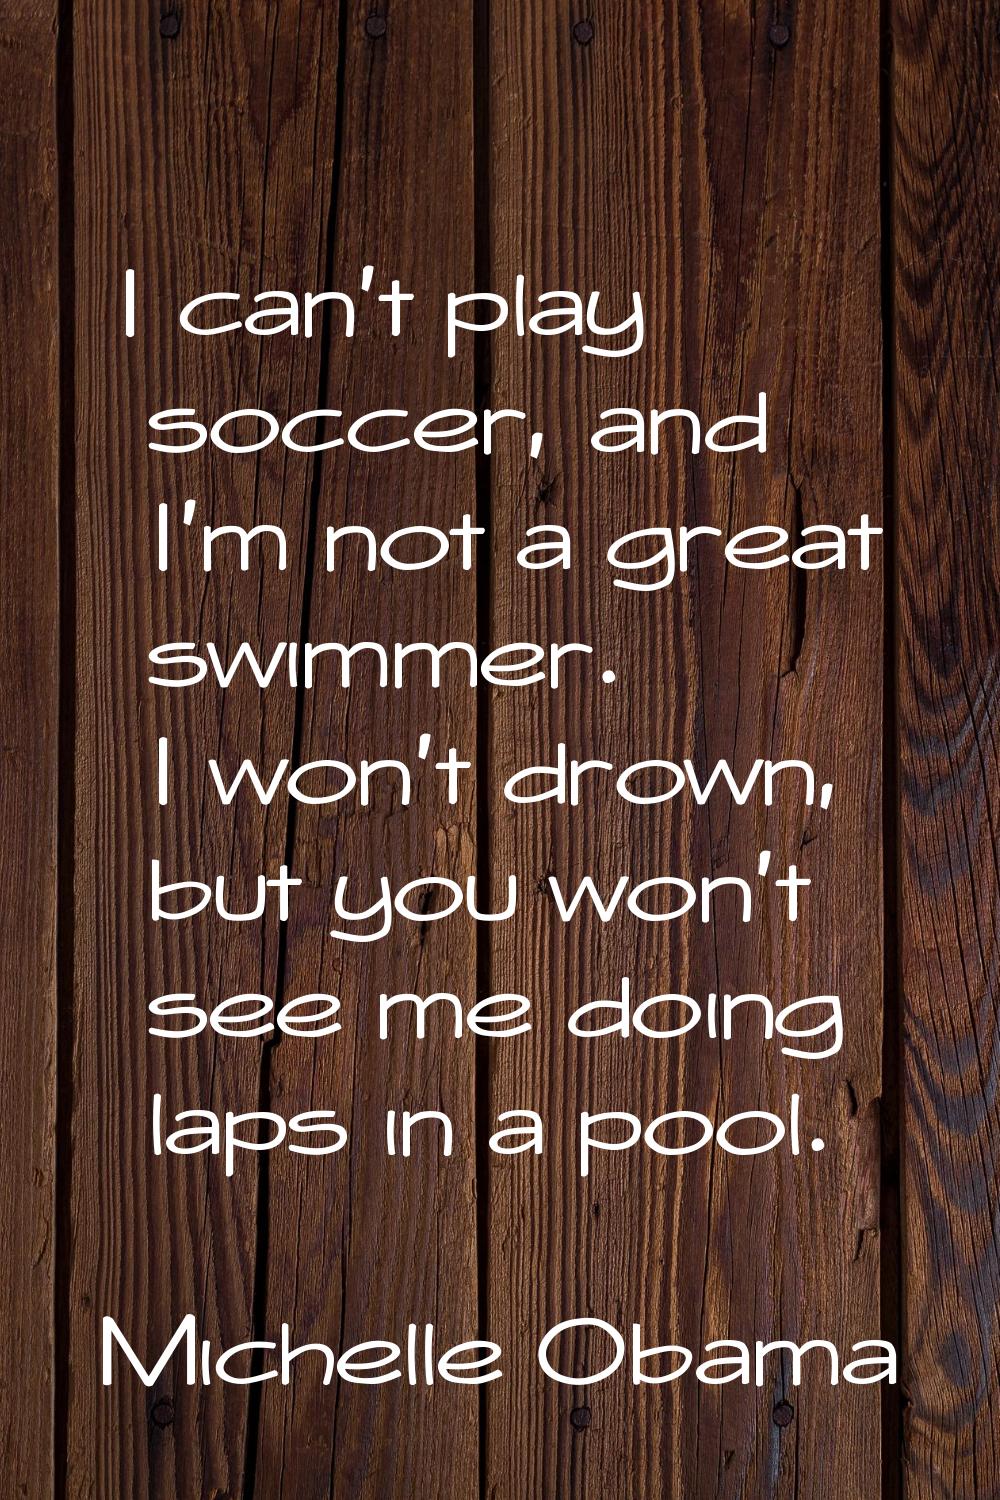 I can't play soccer, and I'm not a great swimmer. I won't drown, but you won't see me doing laps in